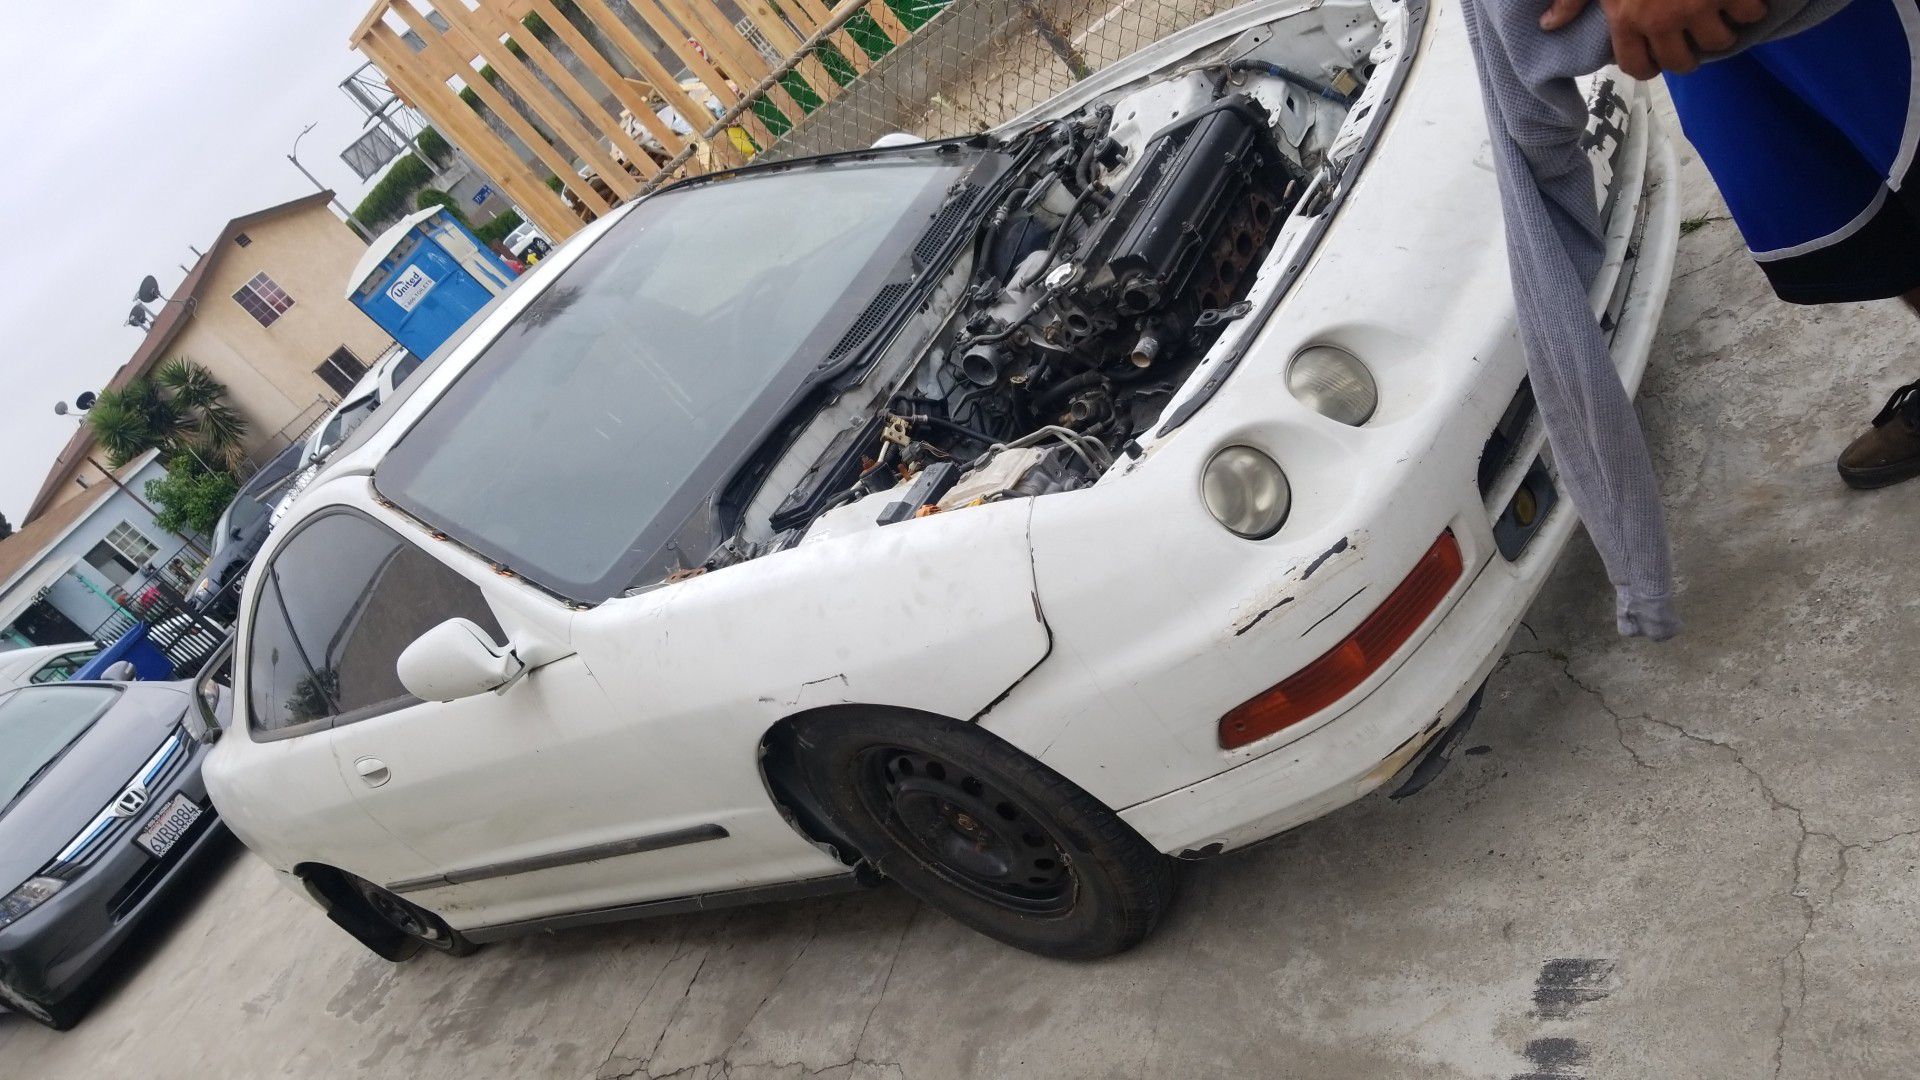 94 acura integra shell or part out lmk